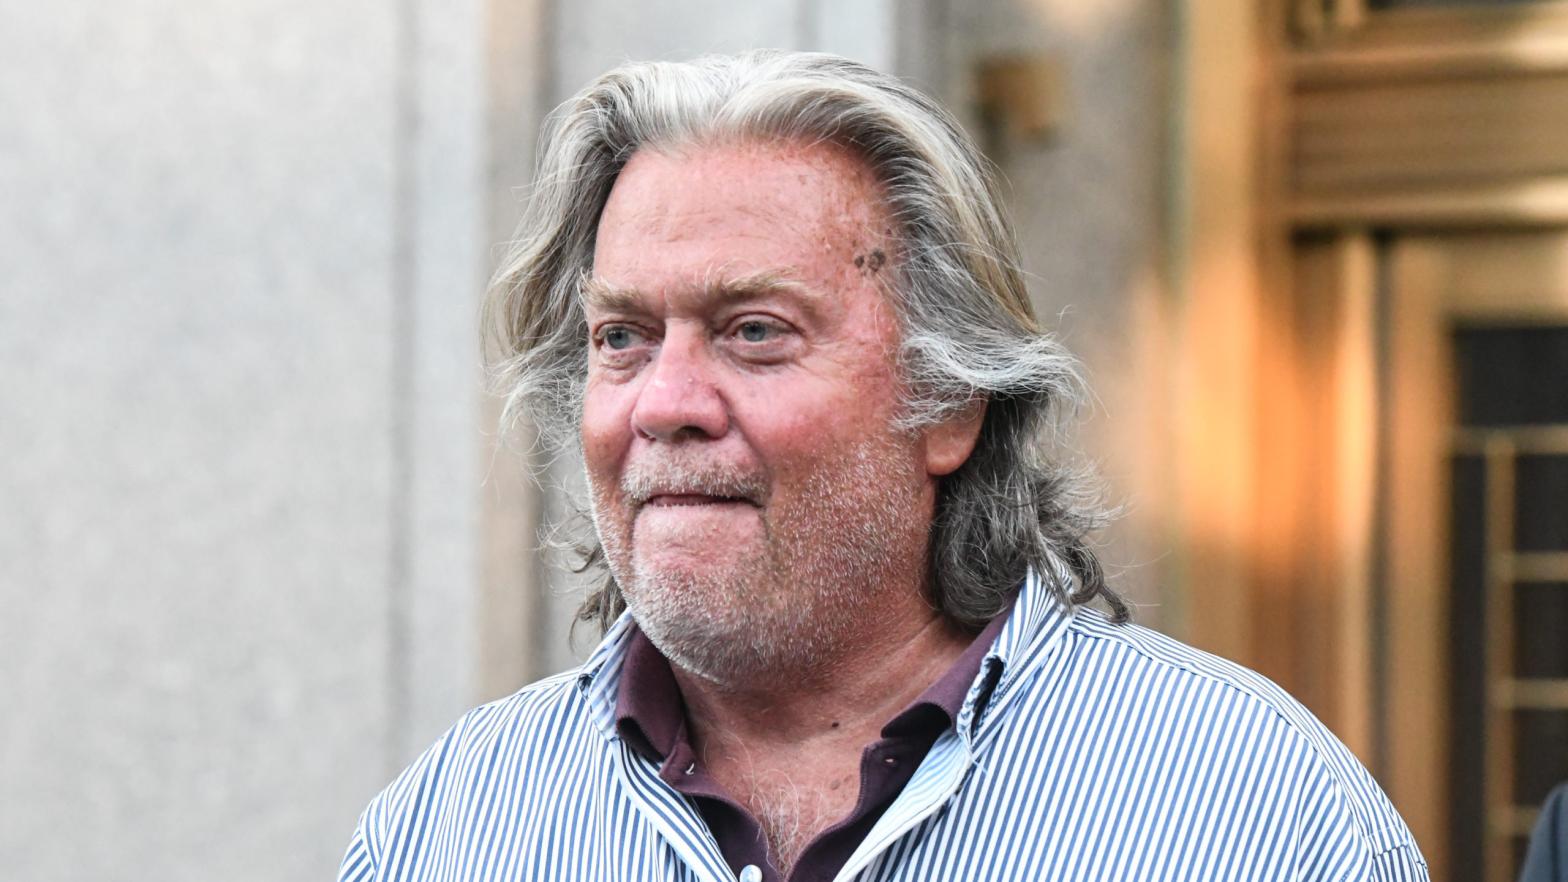 Former White House Chief Strategist Steve Bannon exits the Manhattan Federal Court on August 20, 2020. (Photo: Stephanie Keith, Getty Images)